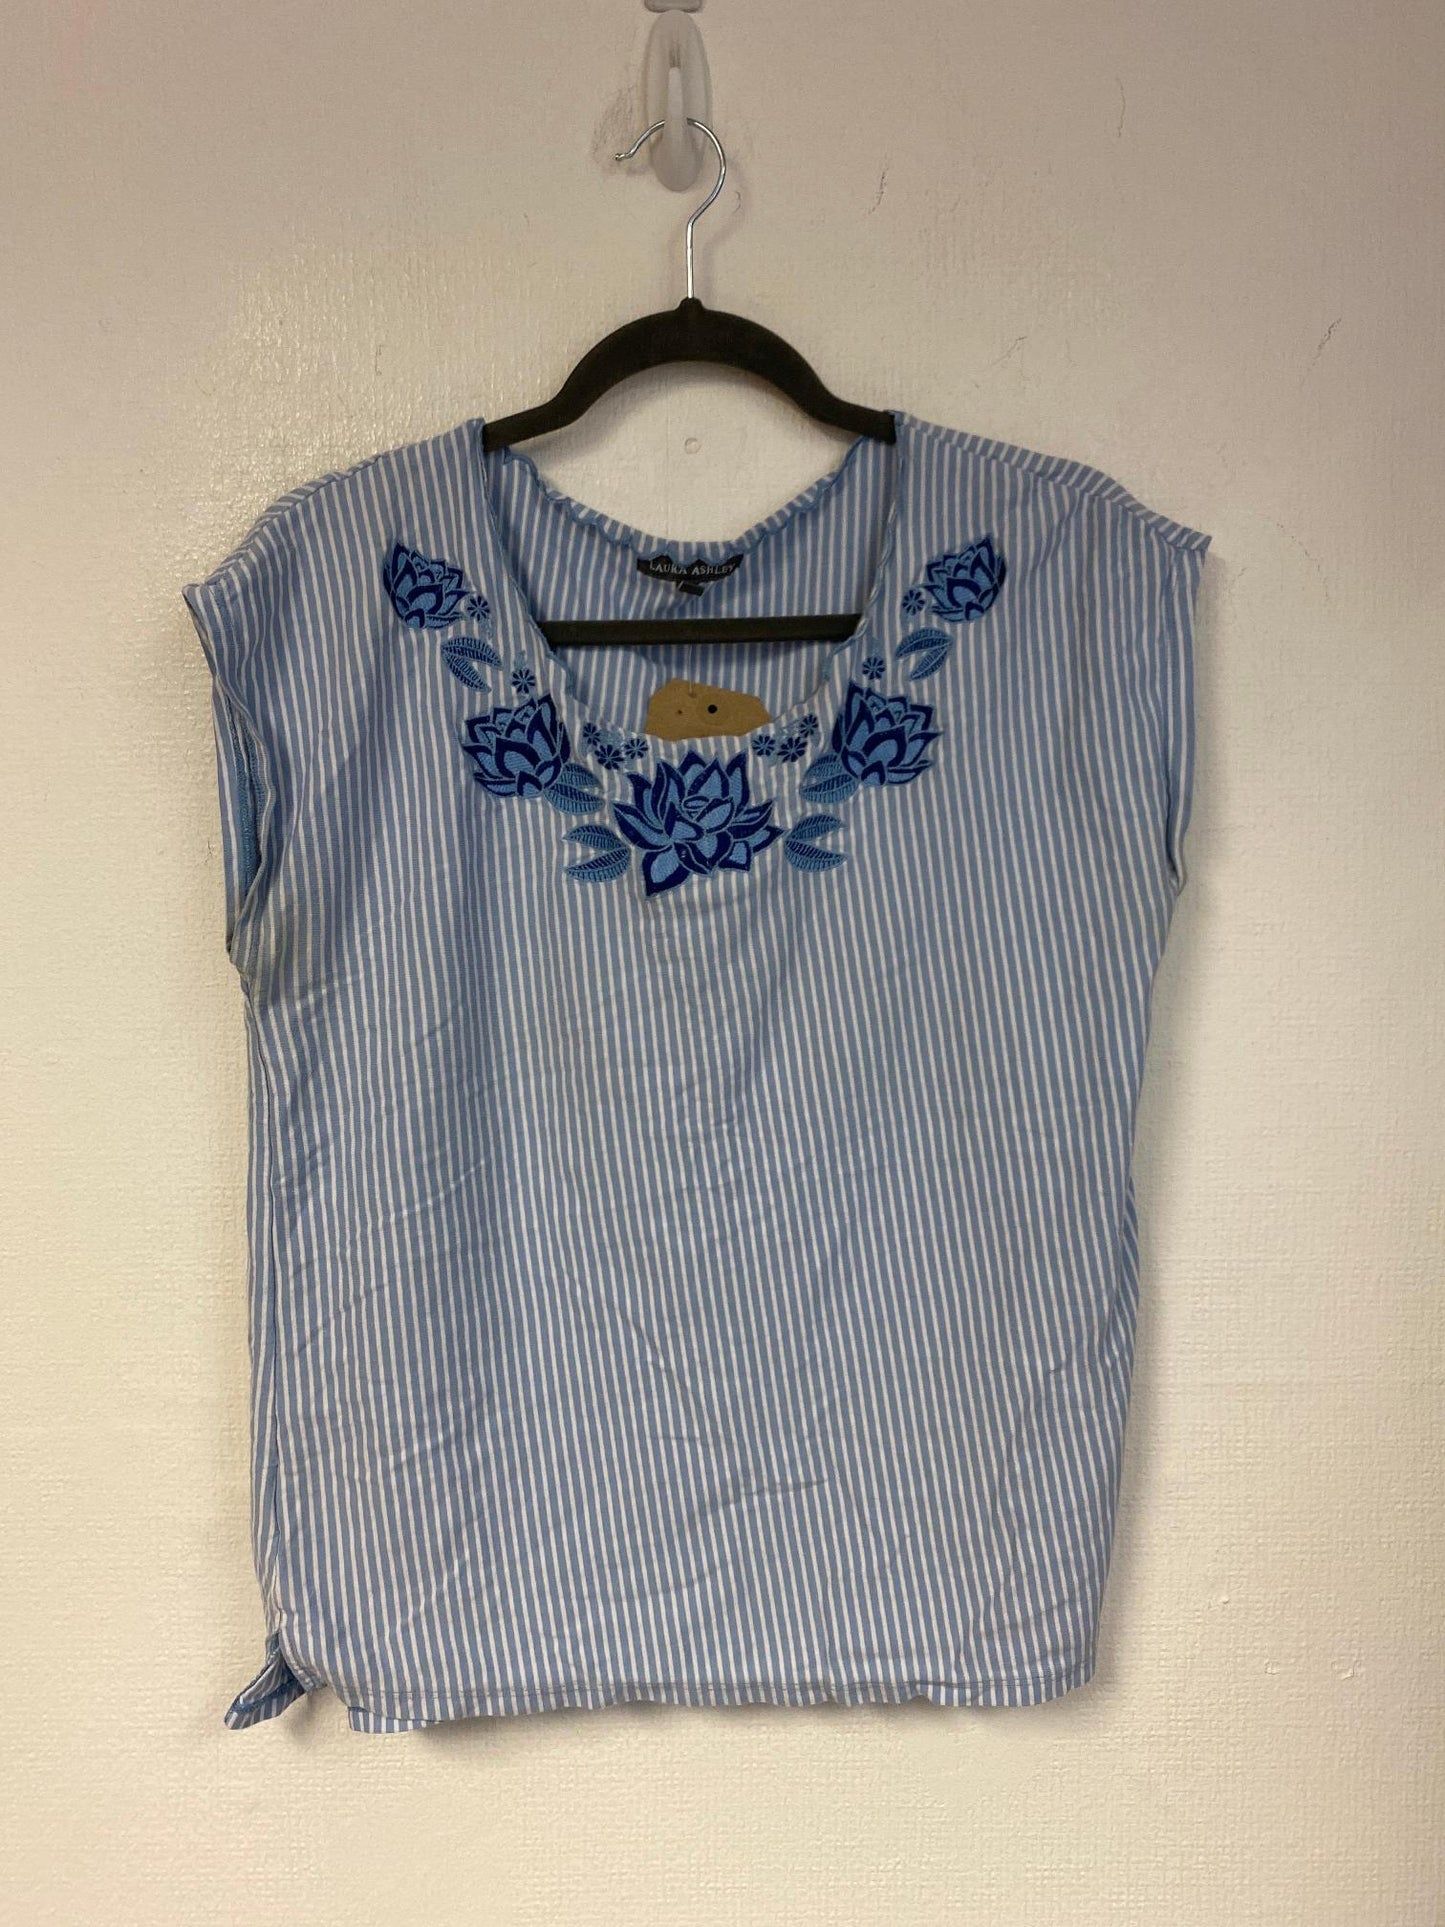 Blue embroidered sleeveless top, size 12 - Damaged Item Sale